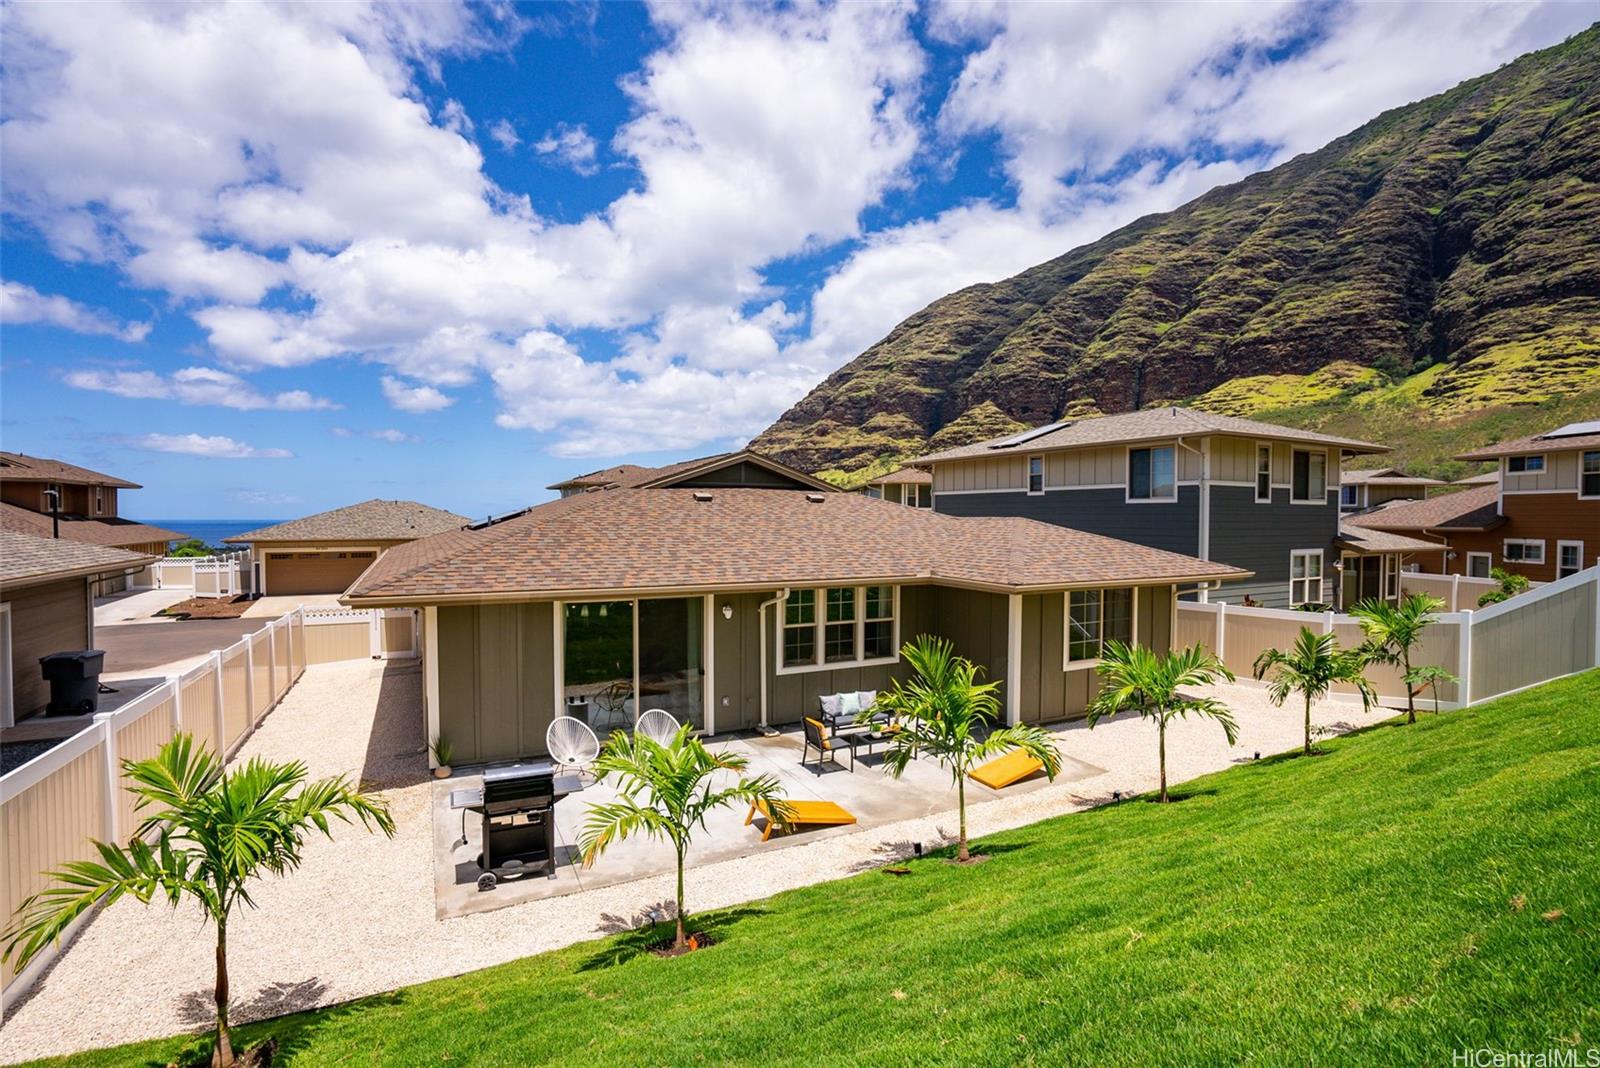 5 minutes from the shores of Makaha Valley, Palm trees surround you with a tropical feel